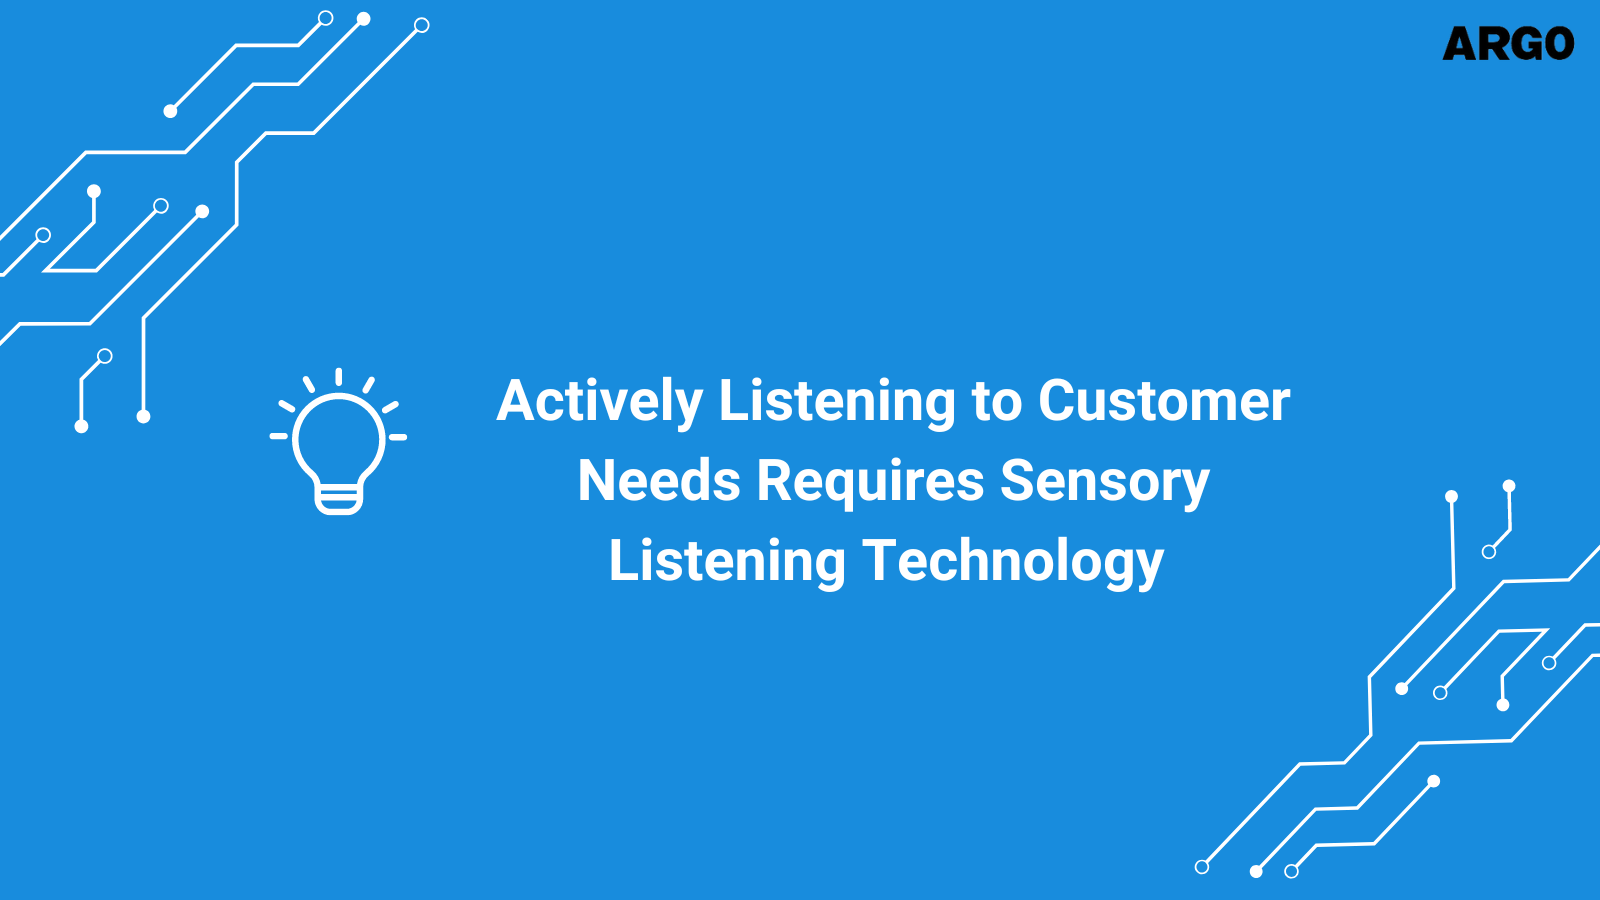 Actively Listening to Customer Needs Requires Sensory Listening Technology